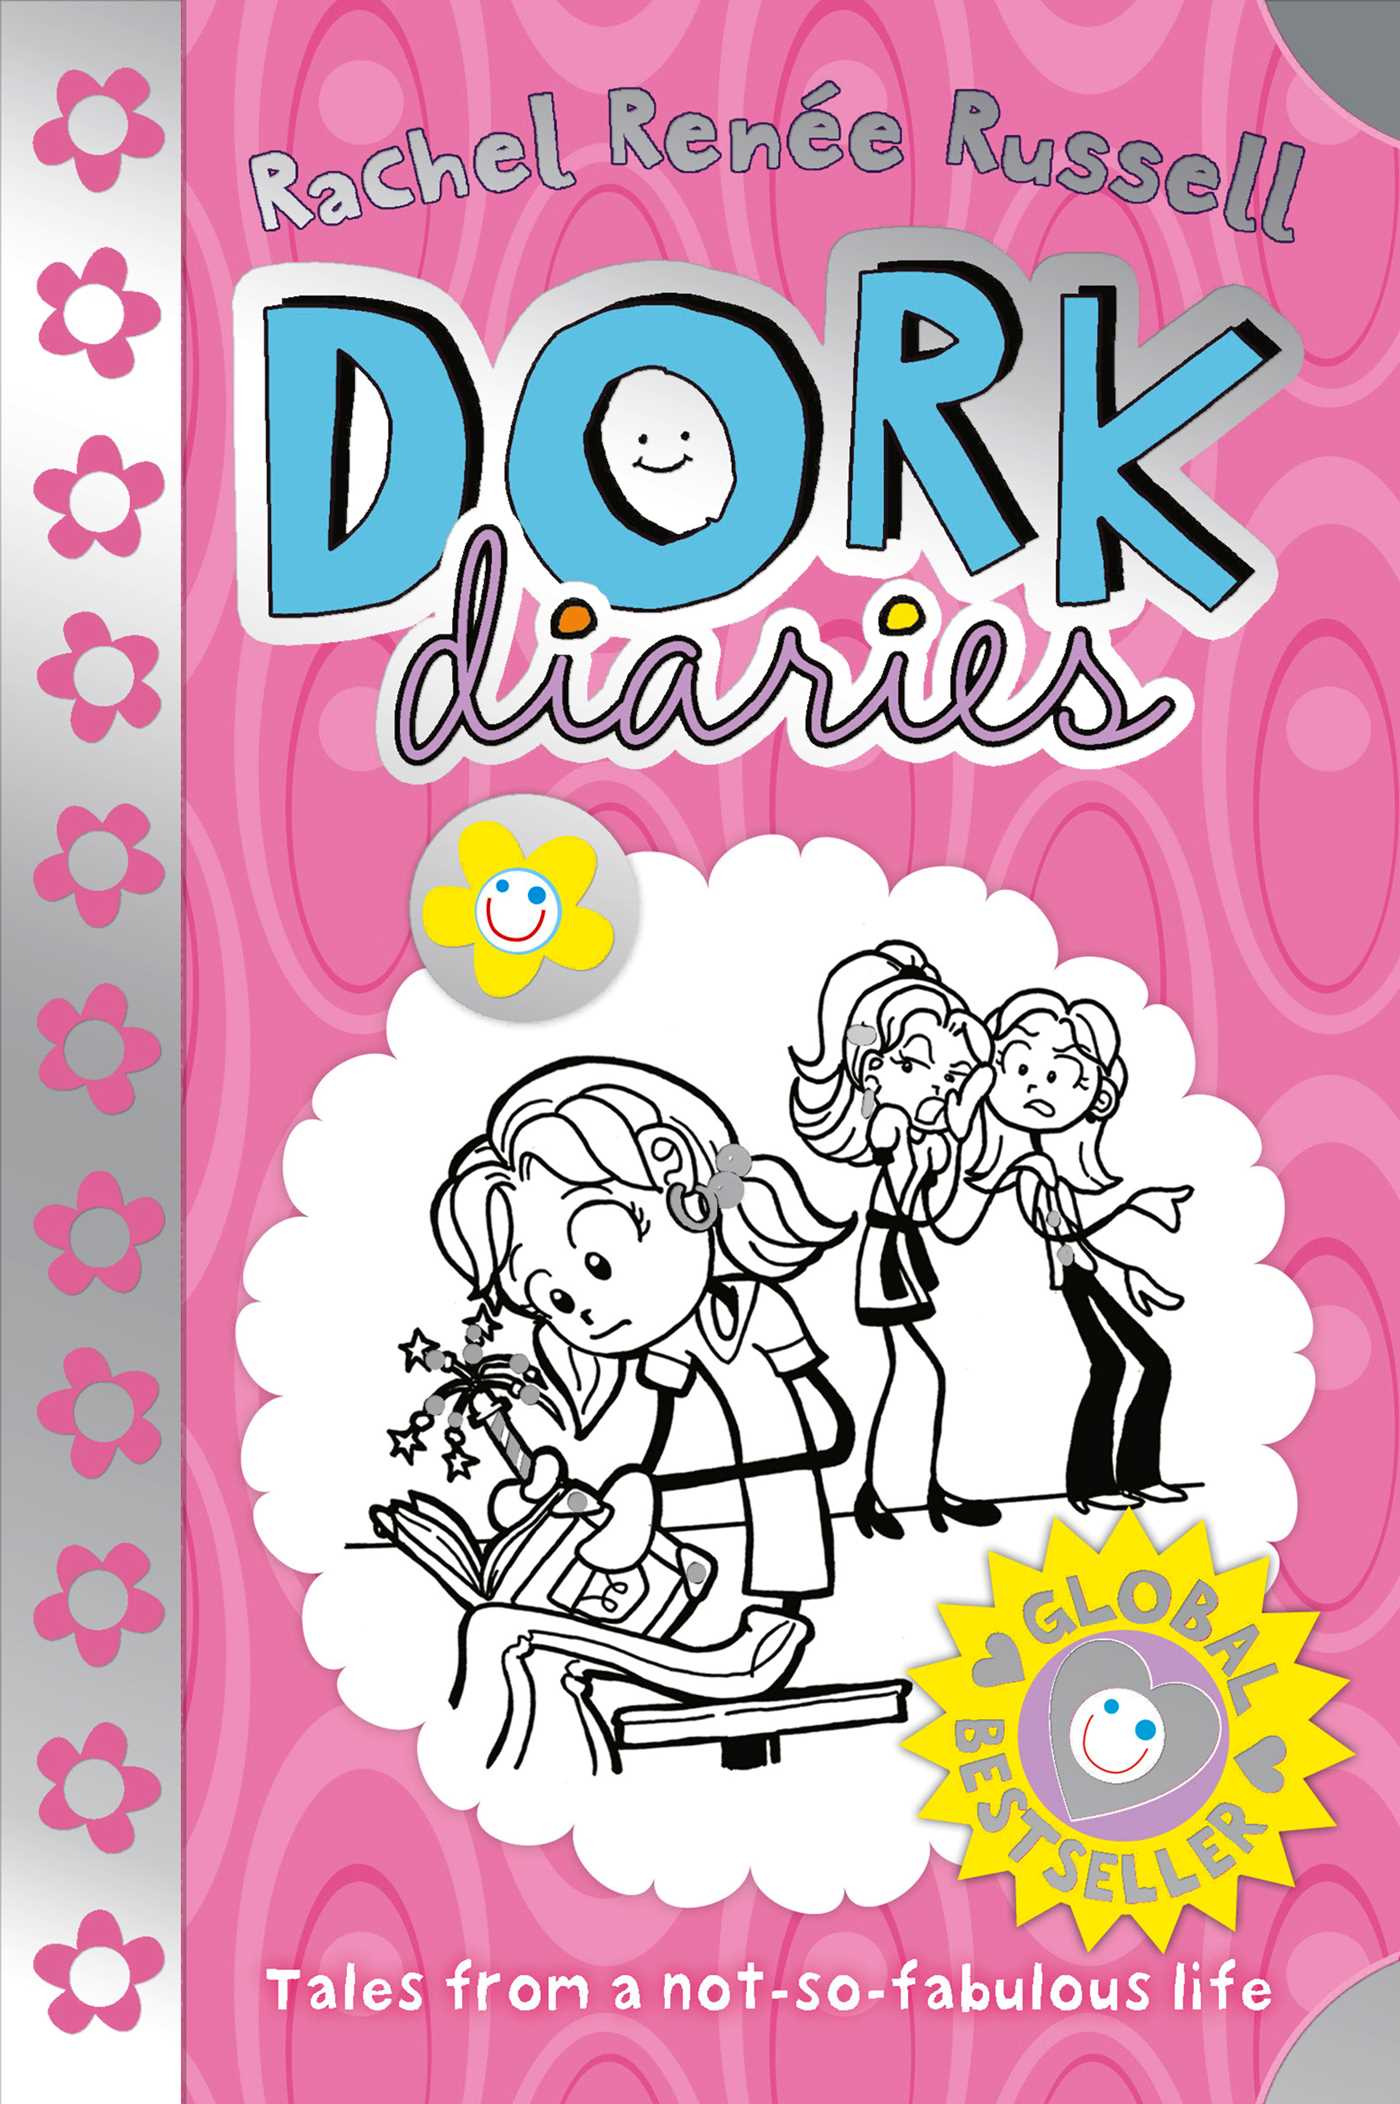 Dork Diaries Books by Rachel Renee Russell from Simon & Schuster India